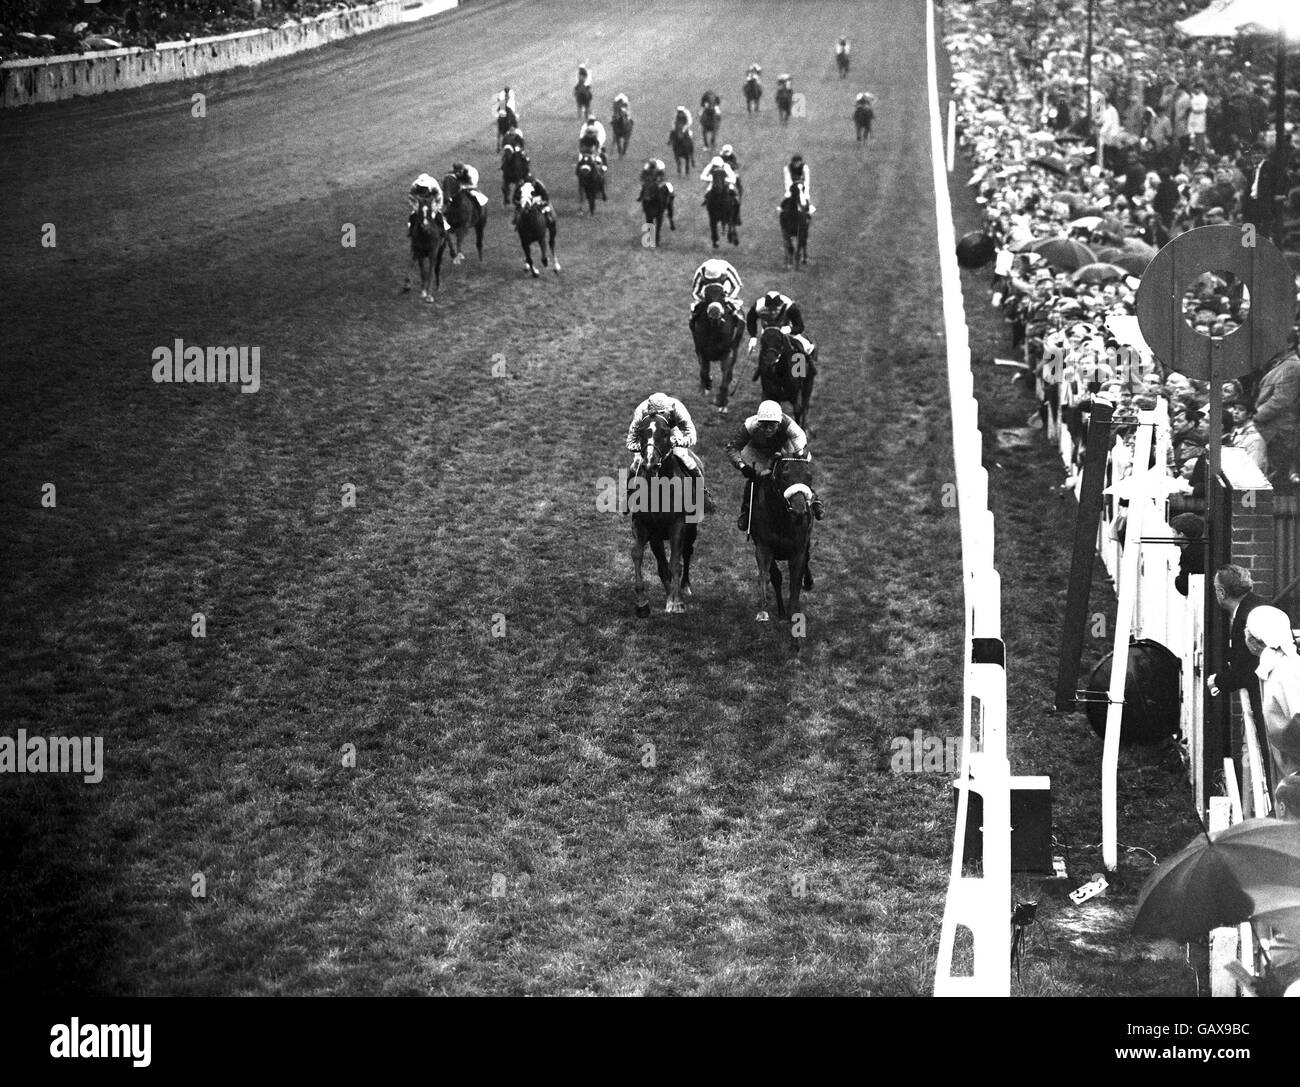 Charlottown (r), Scobie Breasley up, passes the post ahead of Pretendre (l), Paul Cook up, Black Prince II (behind r), Jimmy Lindley up, and Sodium (behind l), Frankie Durr up, to win the Derby Stock Photo